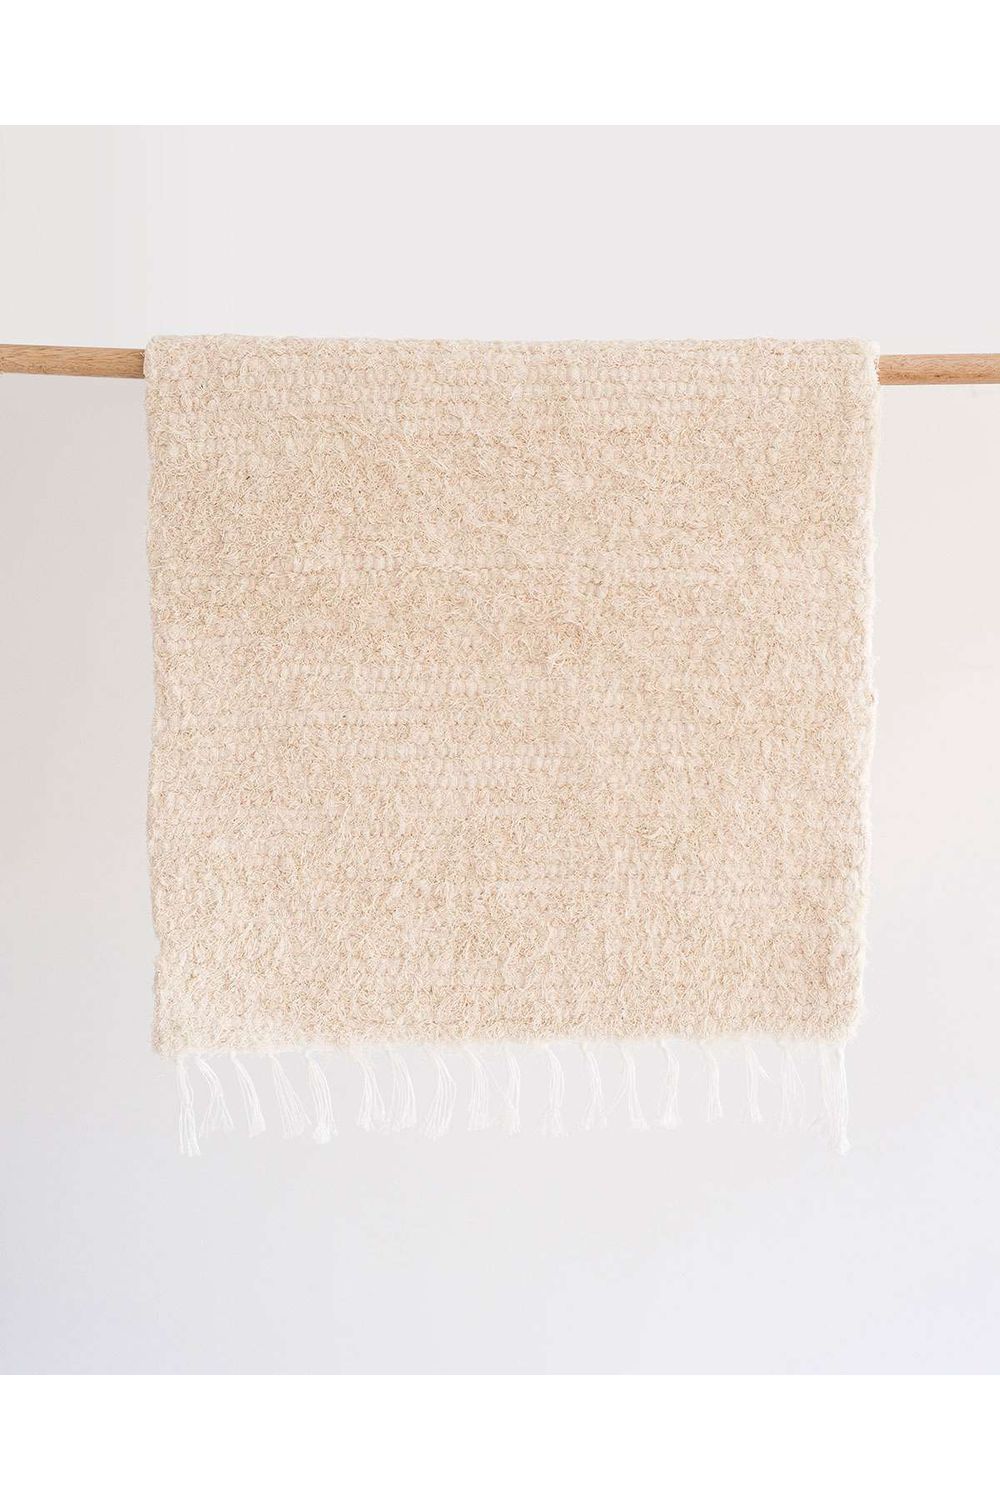 Thick weave cotton rug